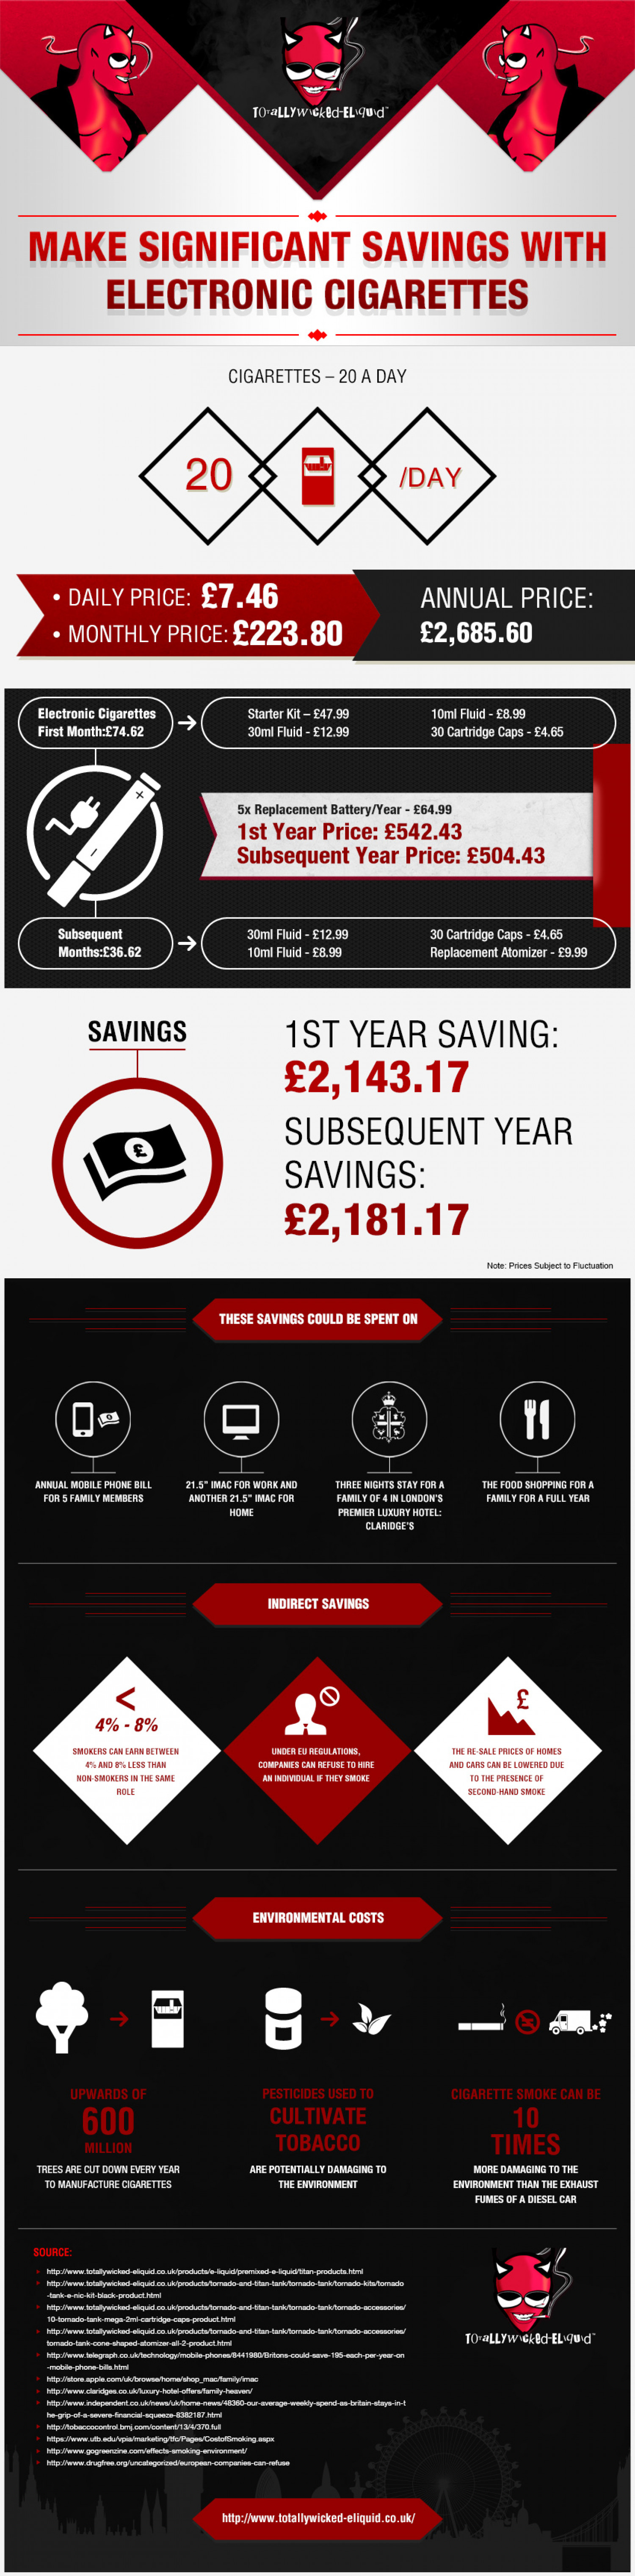 Significant Savings with Electronic Cigarettes Infographic